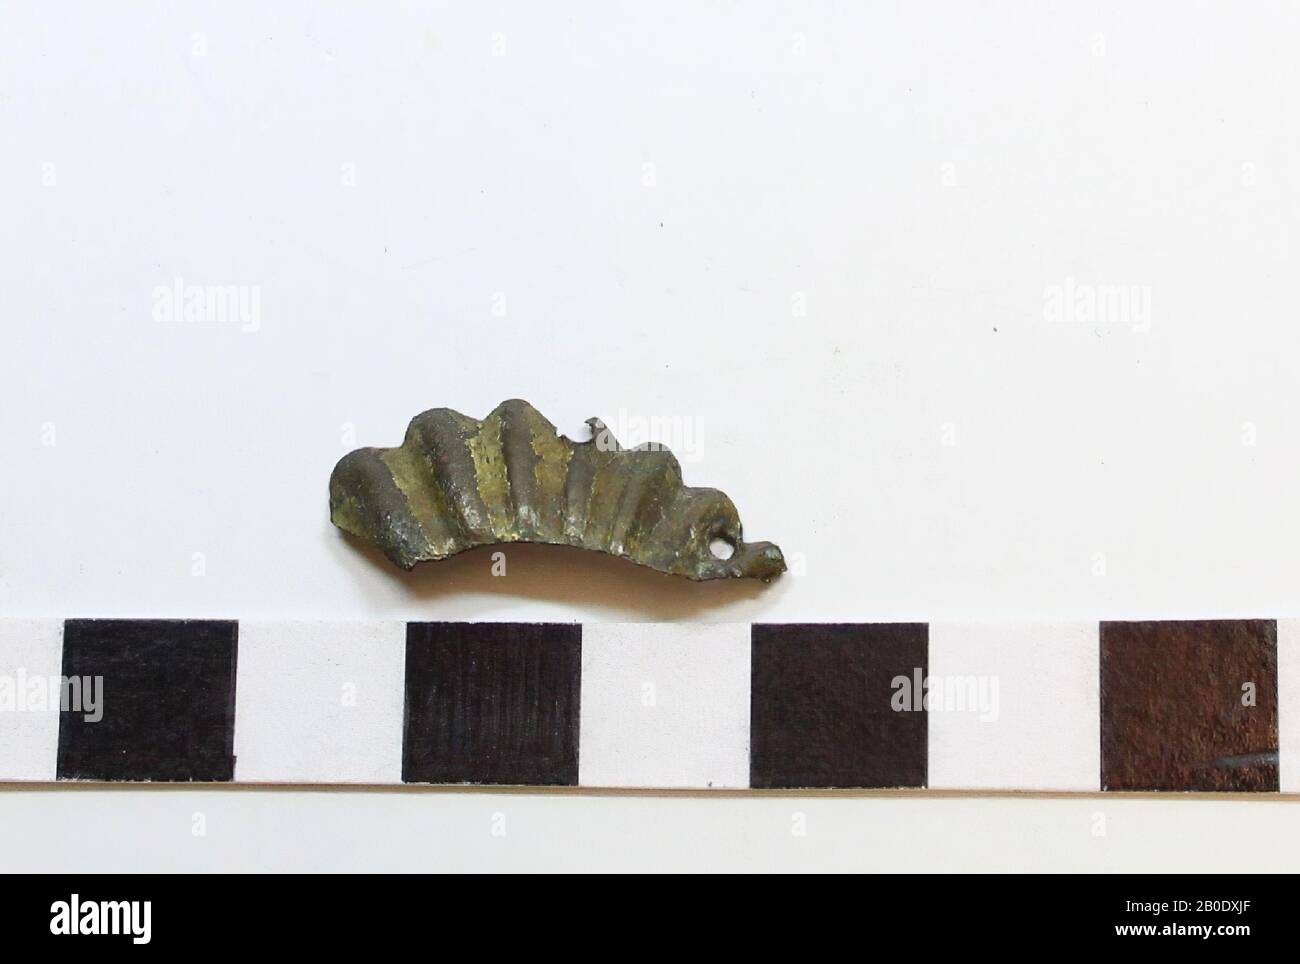 Old Europe, fittings, metal, bronze, 2.6 x 0.9 x 0.1 cm, Location, France Stock Photo